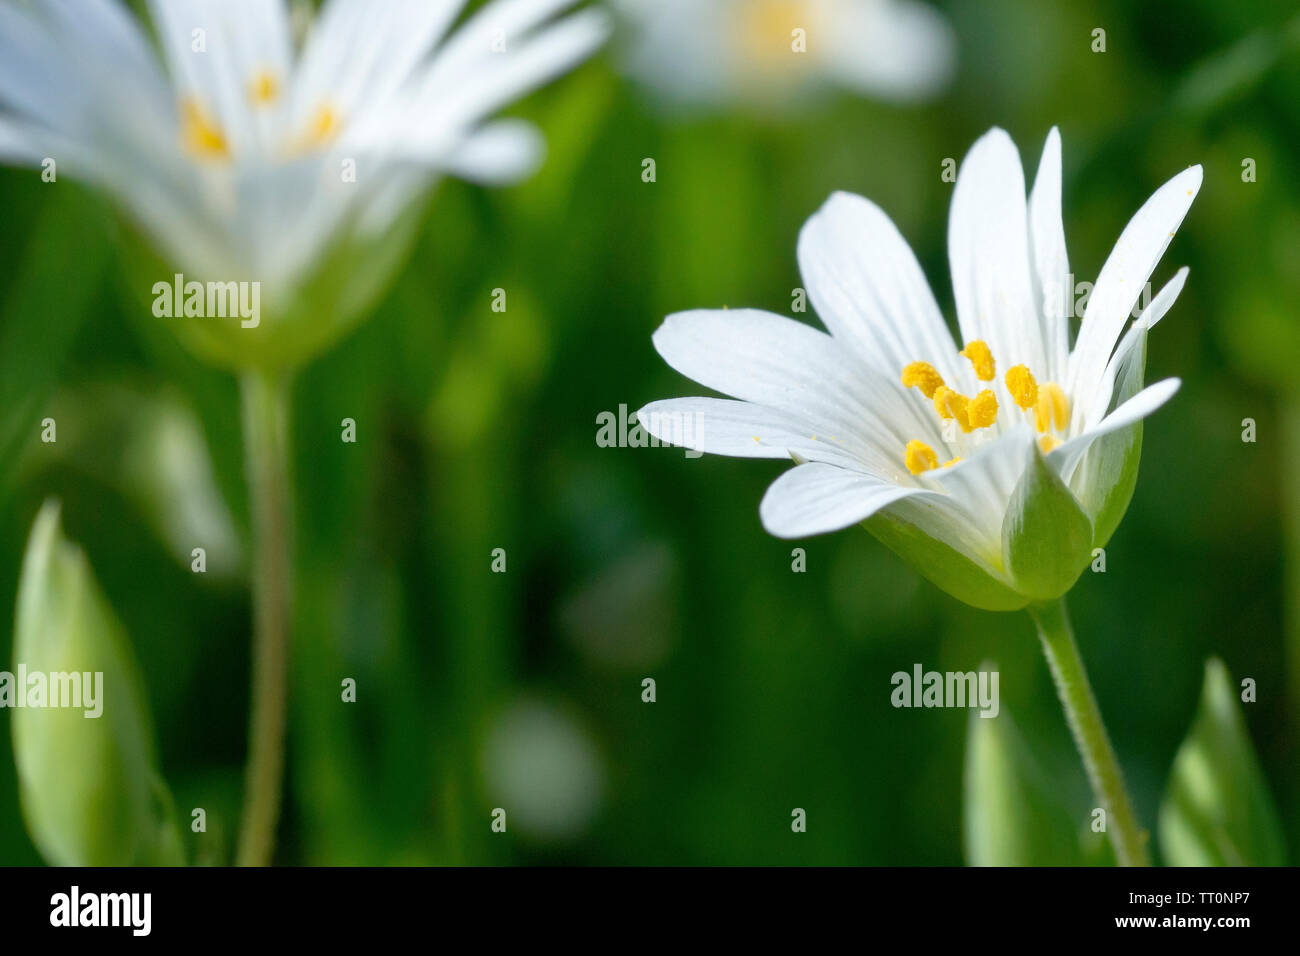 Greater Stitchwort (stellaria holostea), also known as Adder's Meat, close up of a single flower out of many. Stock Photo